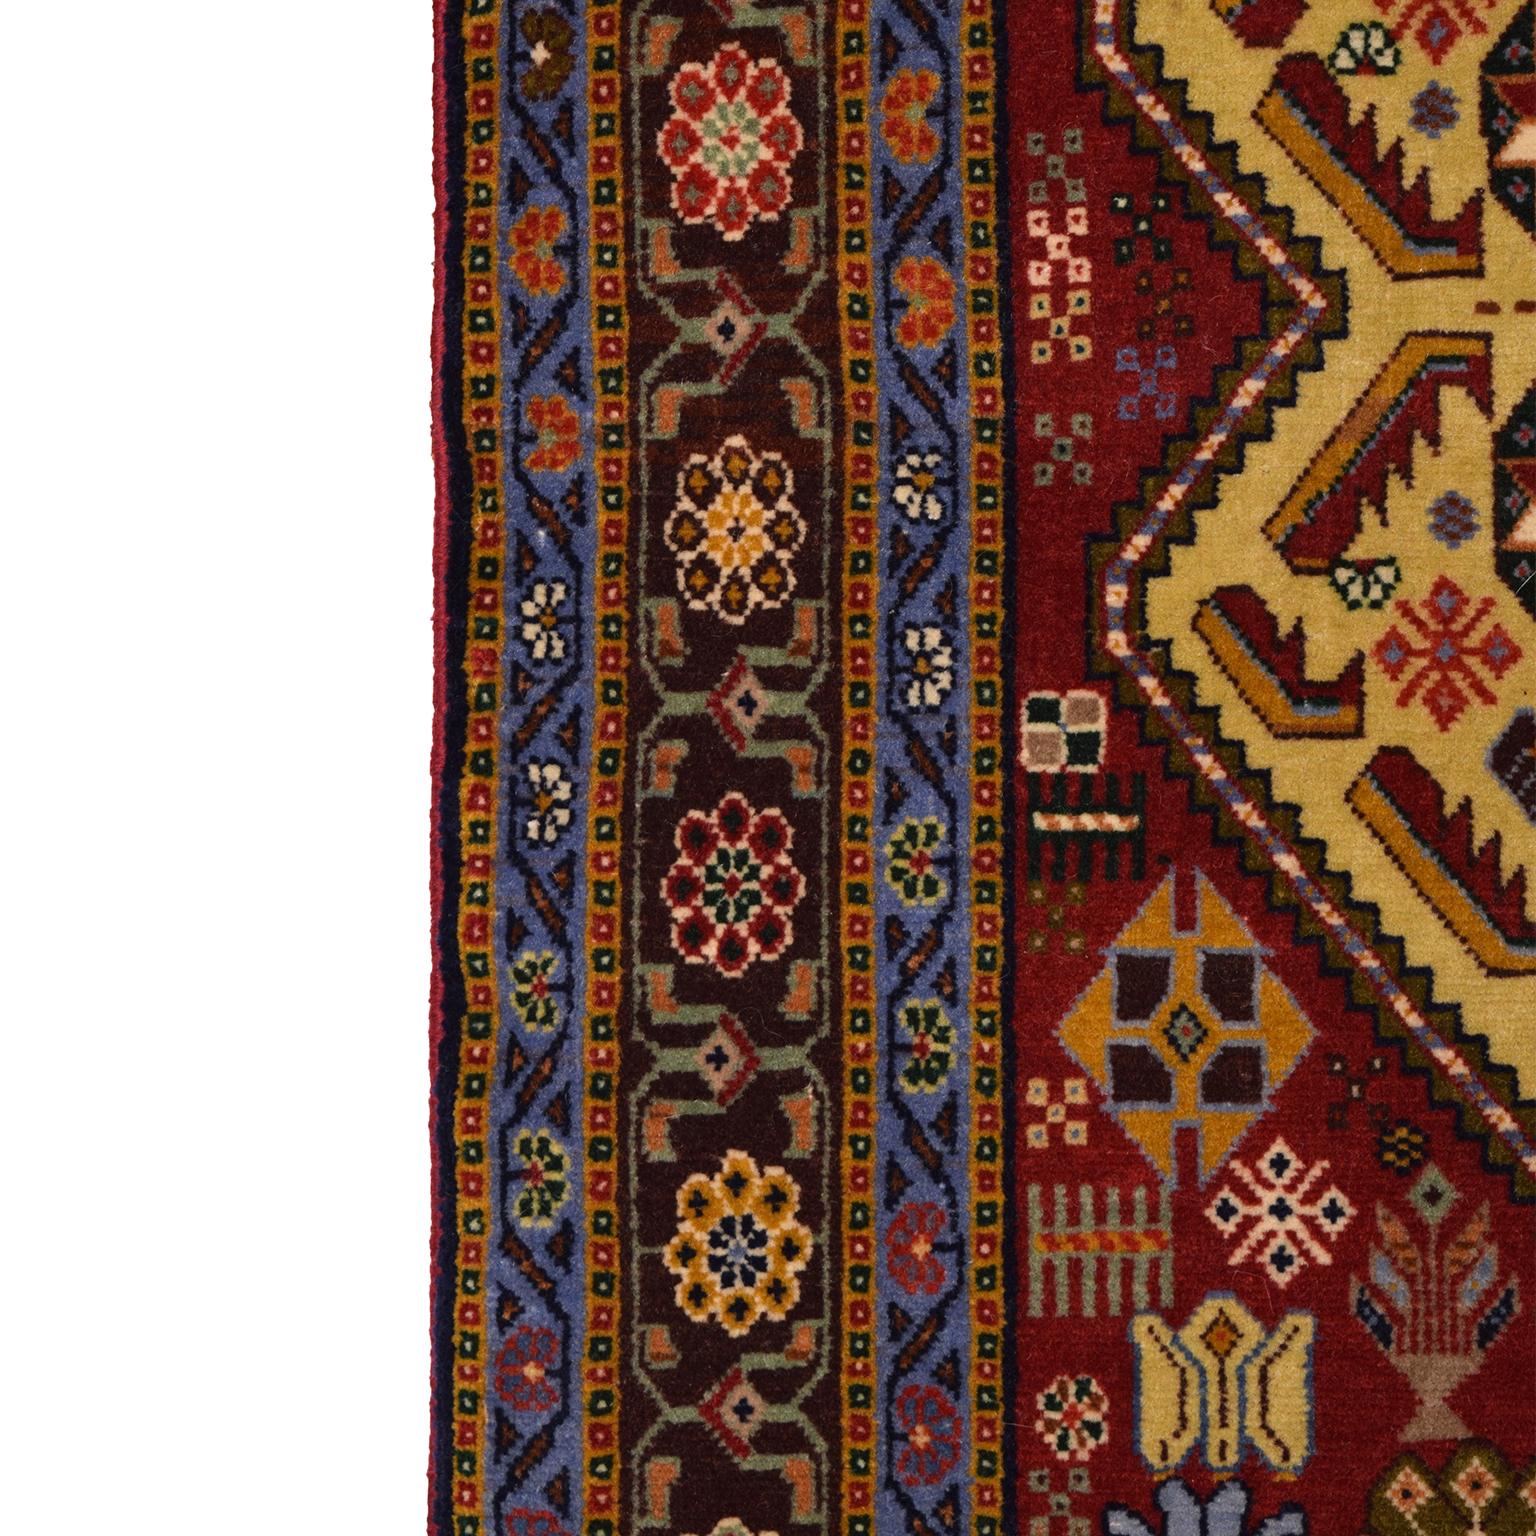 Mid-20th Century Vintage 1940s Persian Kashkouli Tribal Rug, Red and Yellow, 3' x 5' For Sale